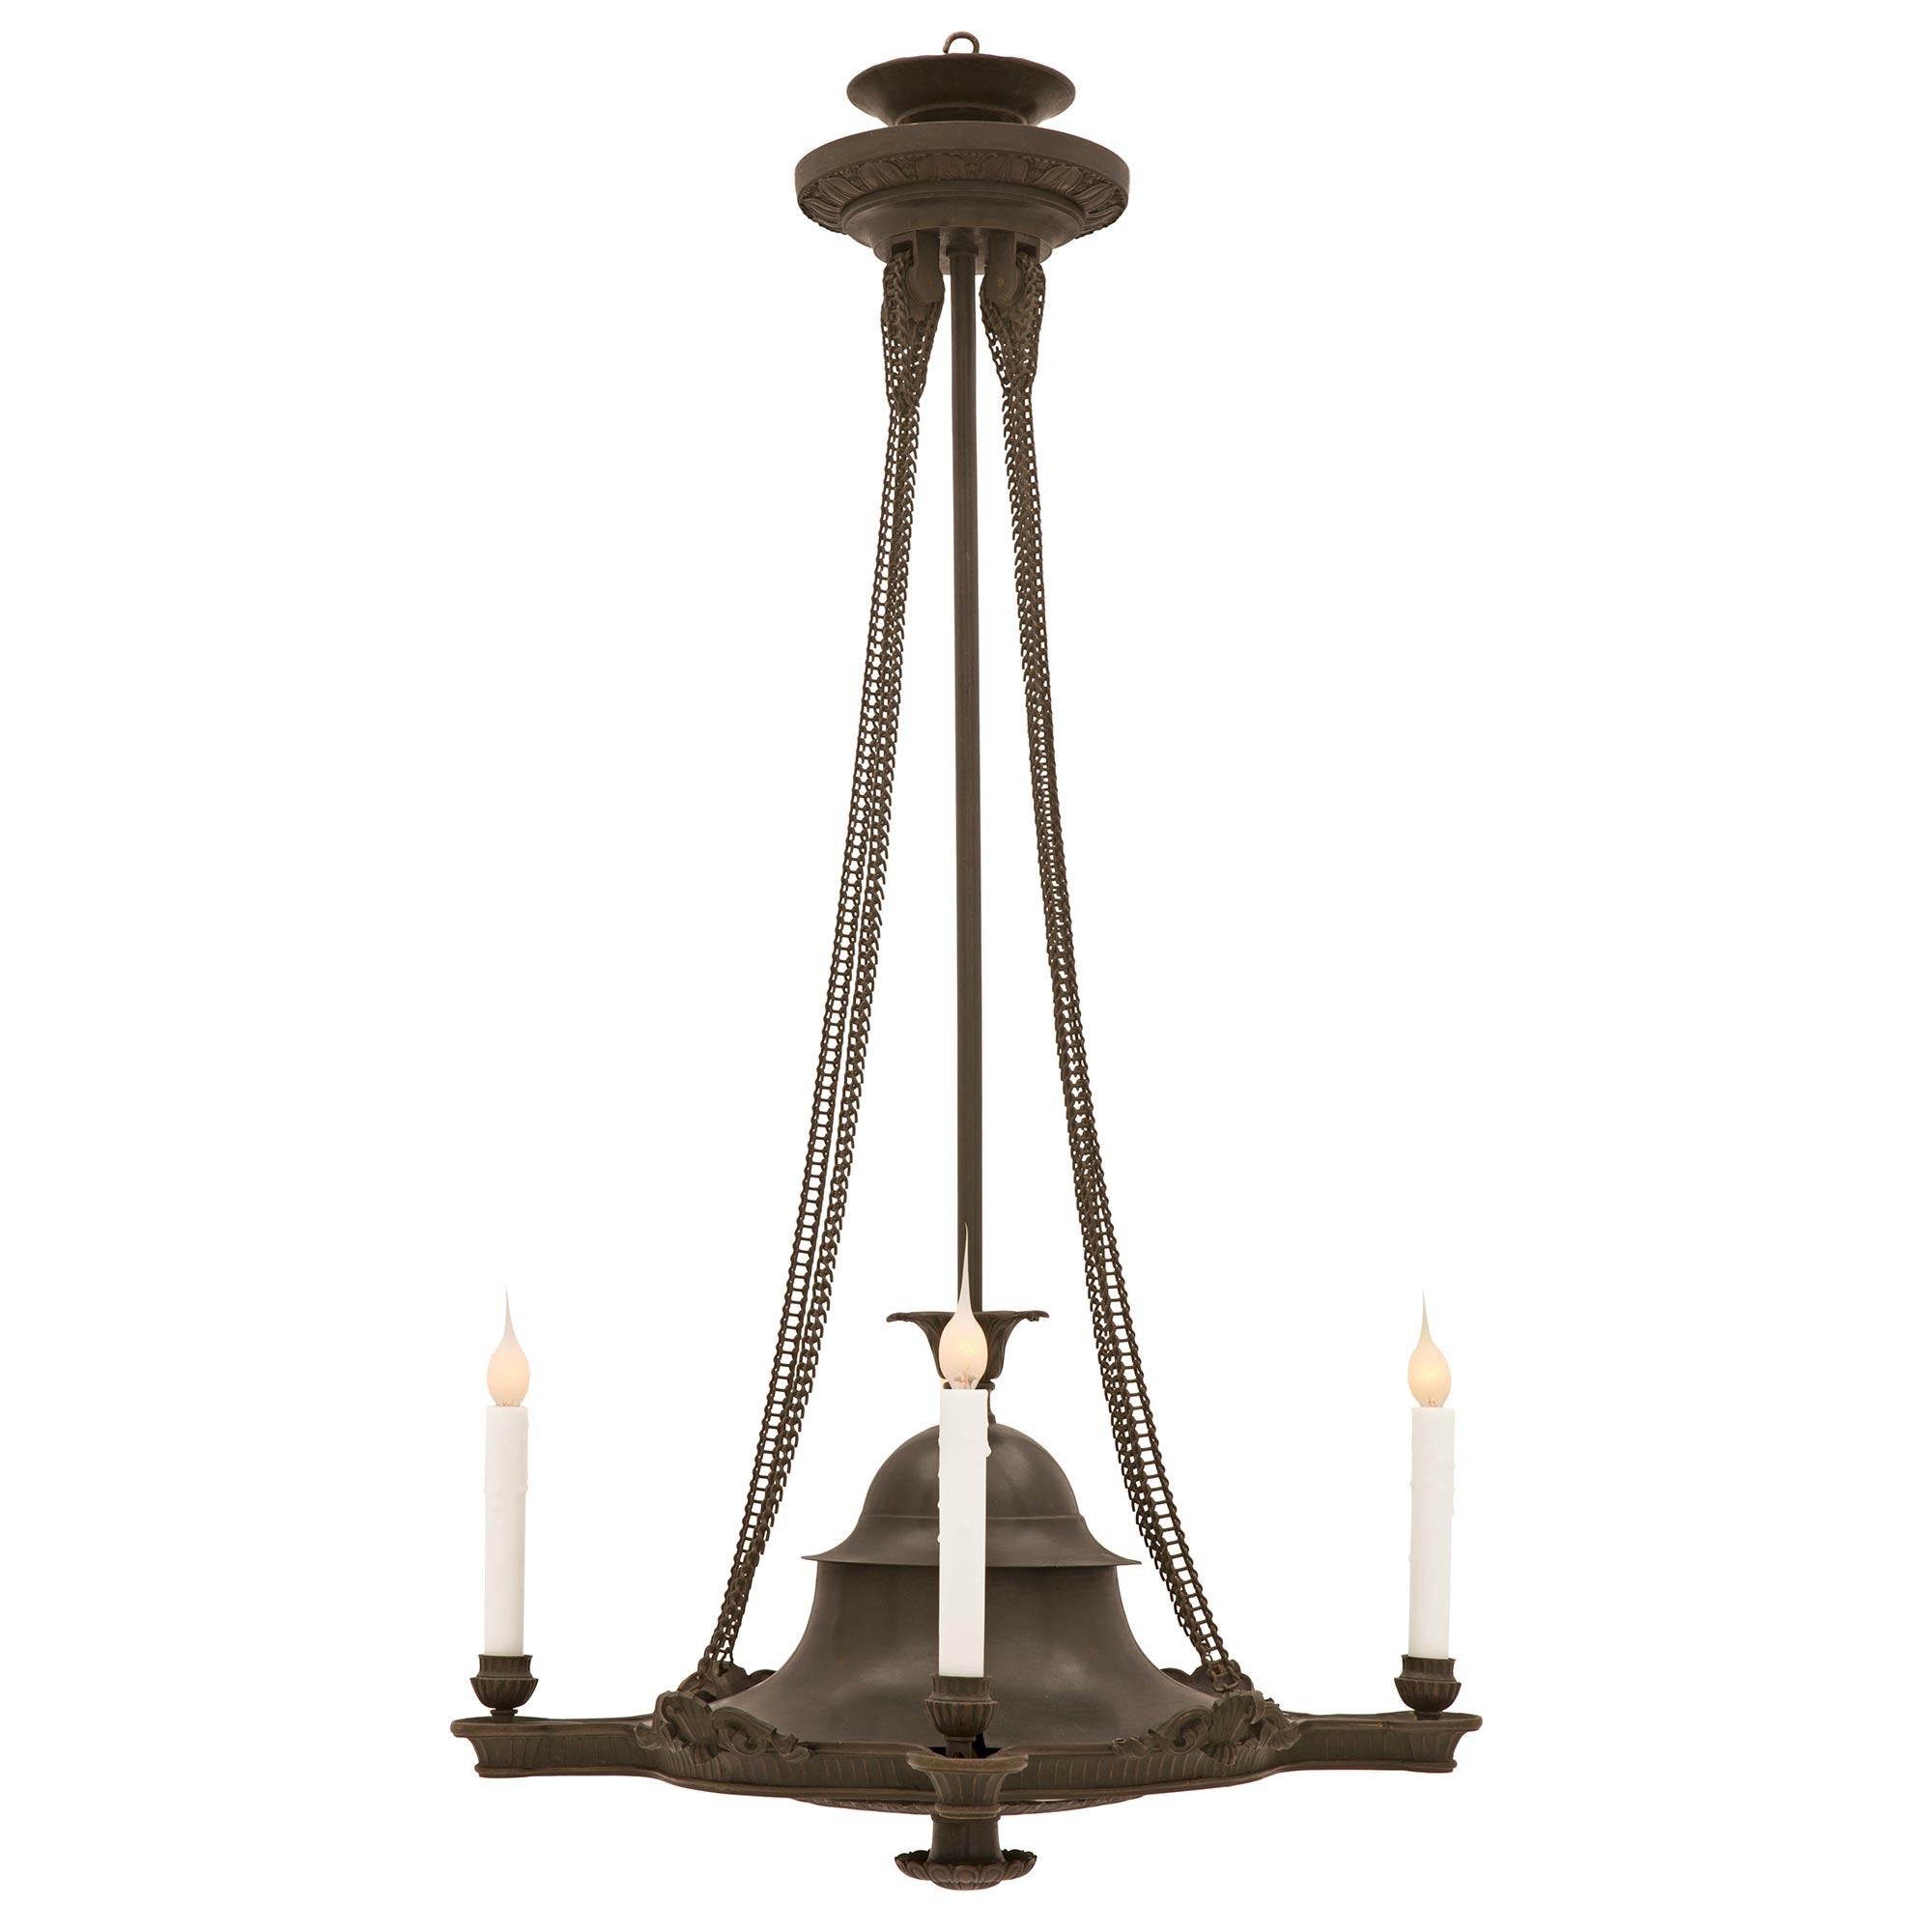 A handsome French early 19th century Charles X st. patinated bronze chandelier. The four light chandelier is centered by a charming richly chased reeded floral bottom finial below beautiful foliate designs and charming rosettes. The most decorative